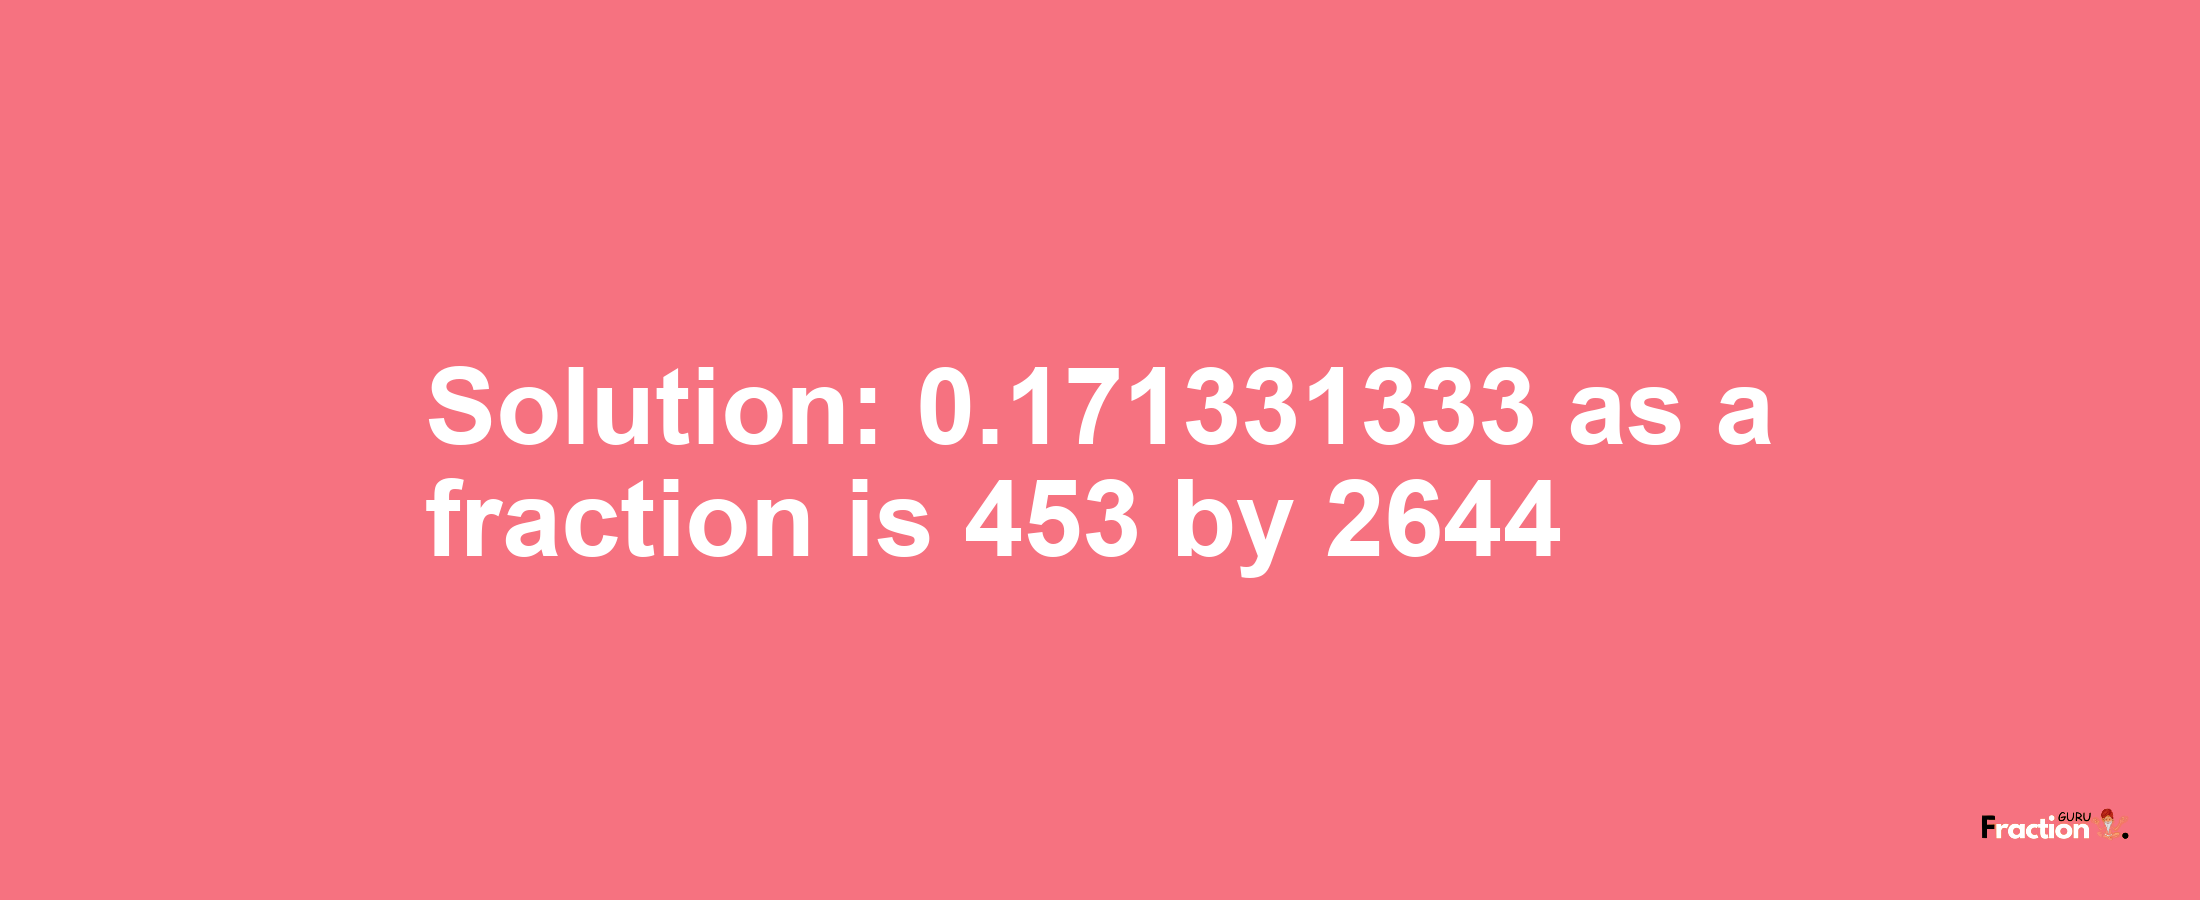 Solution:0.171331333 as a fraction is 453/2644